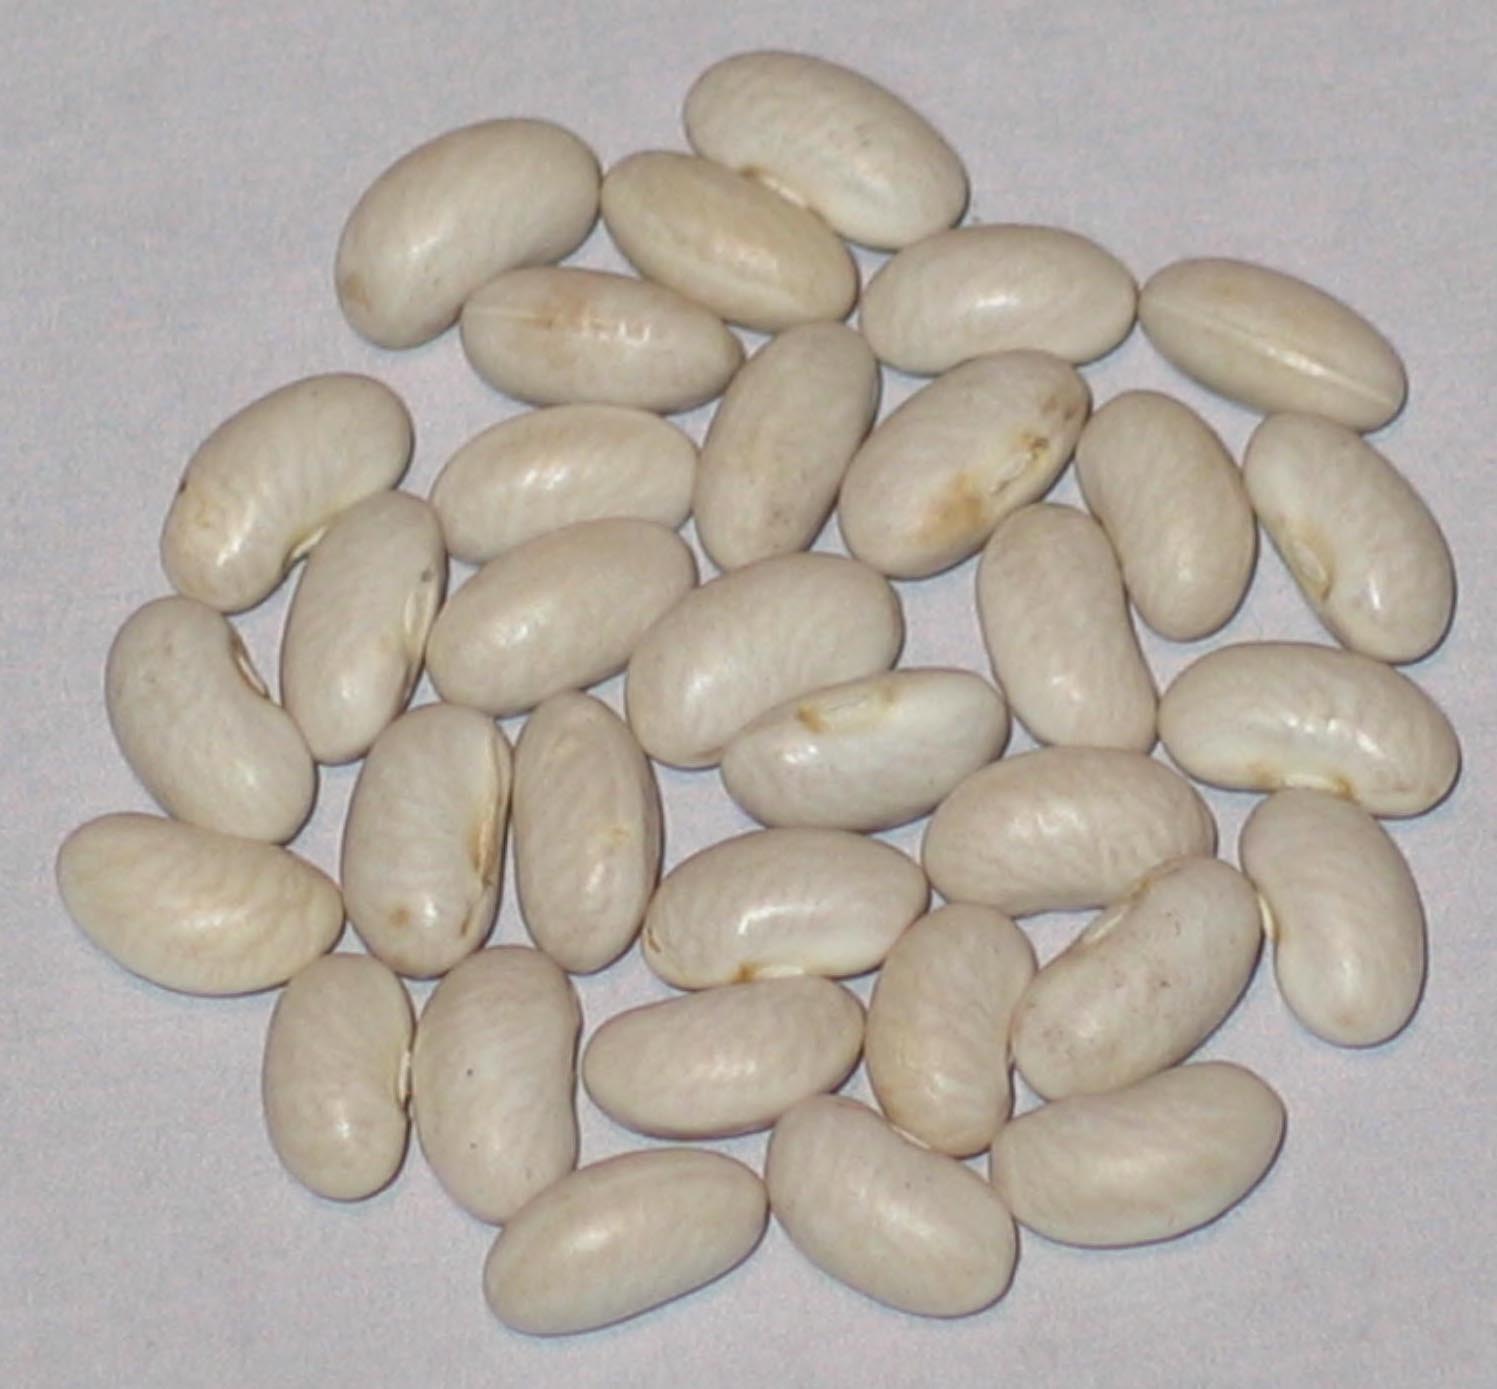 image of Parkers Half Runner beans